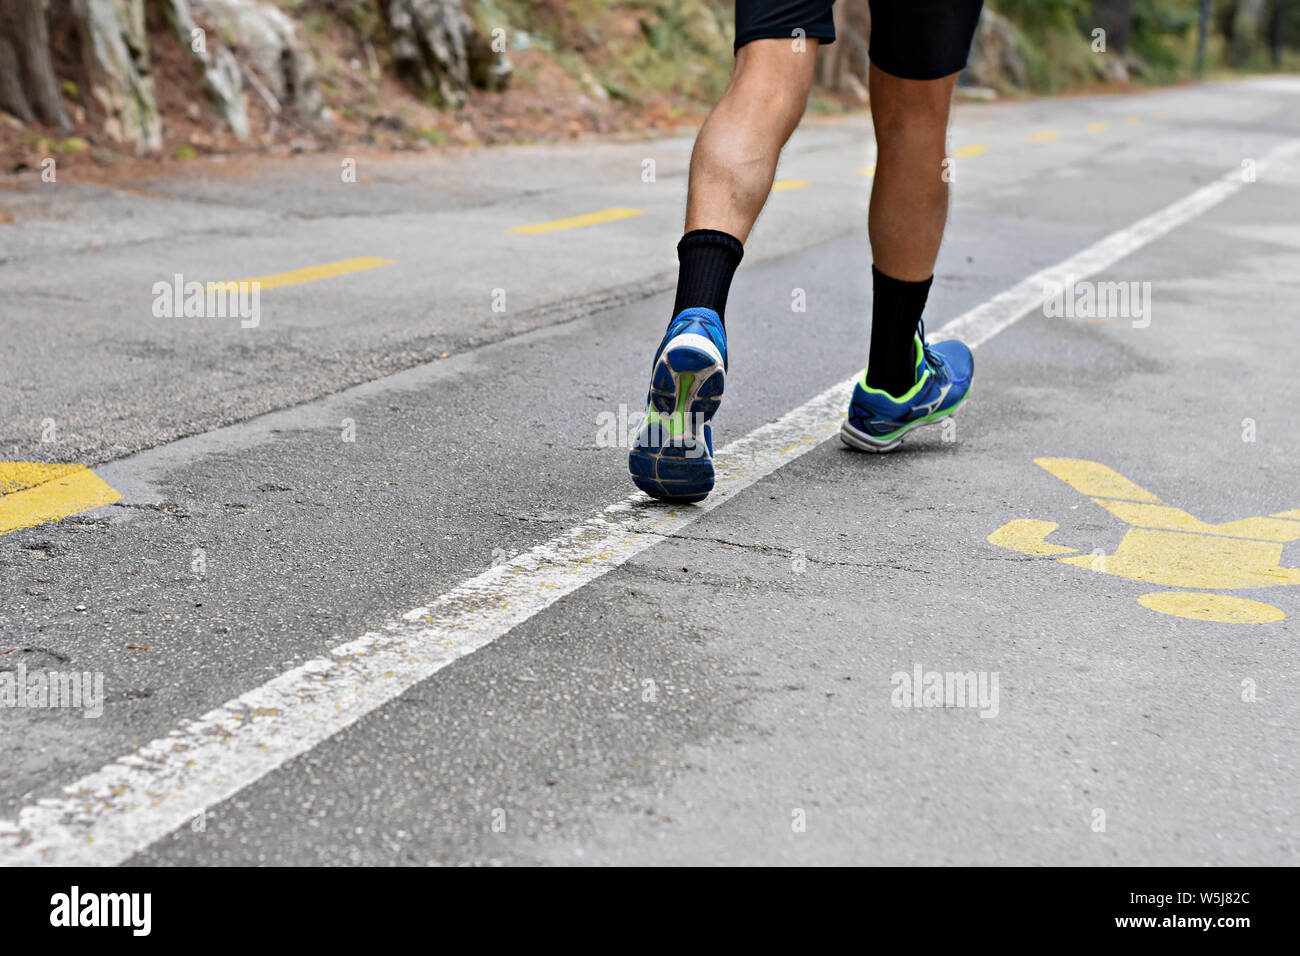 Runner/ Focus on runner legs and shoes/ Conceptual image of health and healthy lifestyle Stock Photo